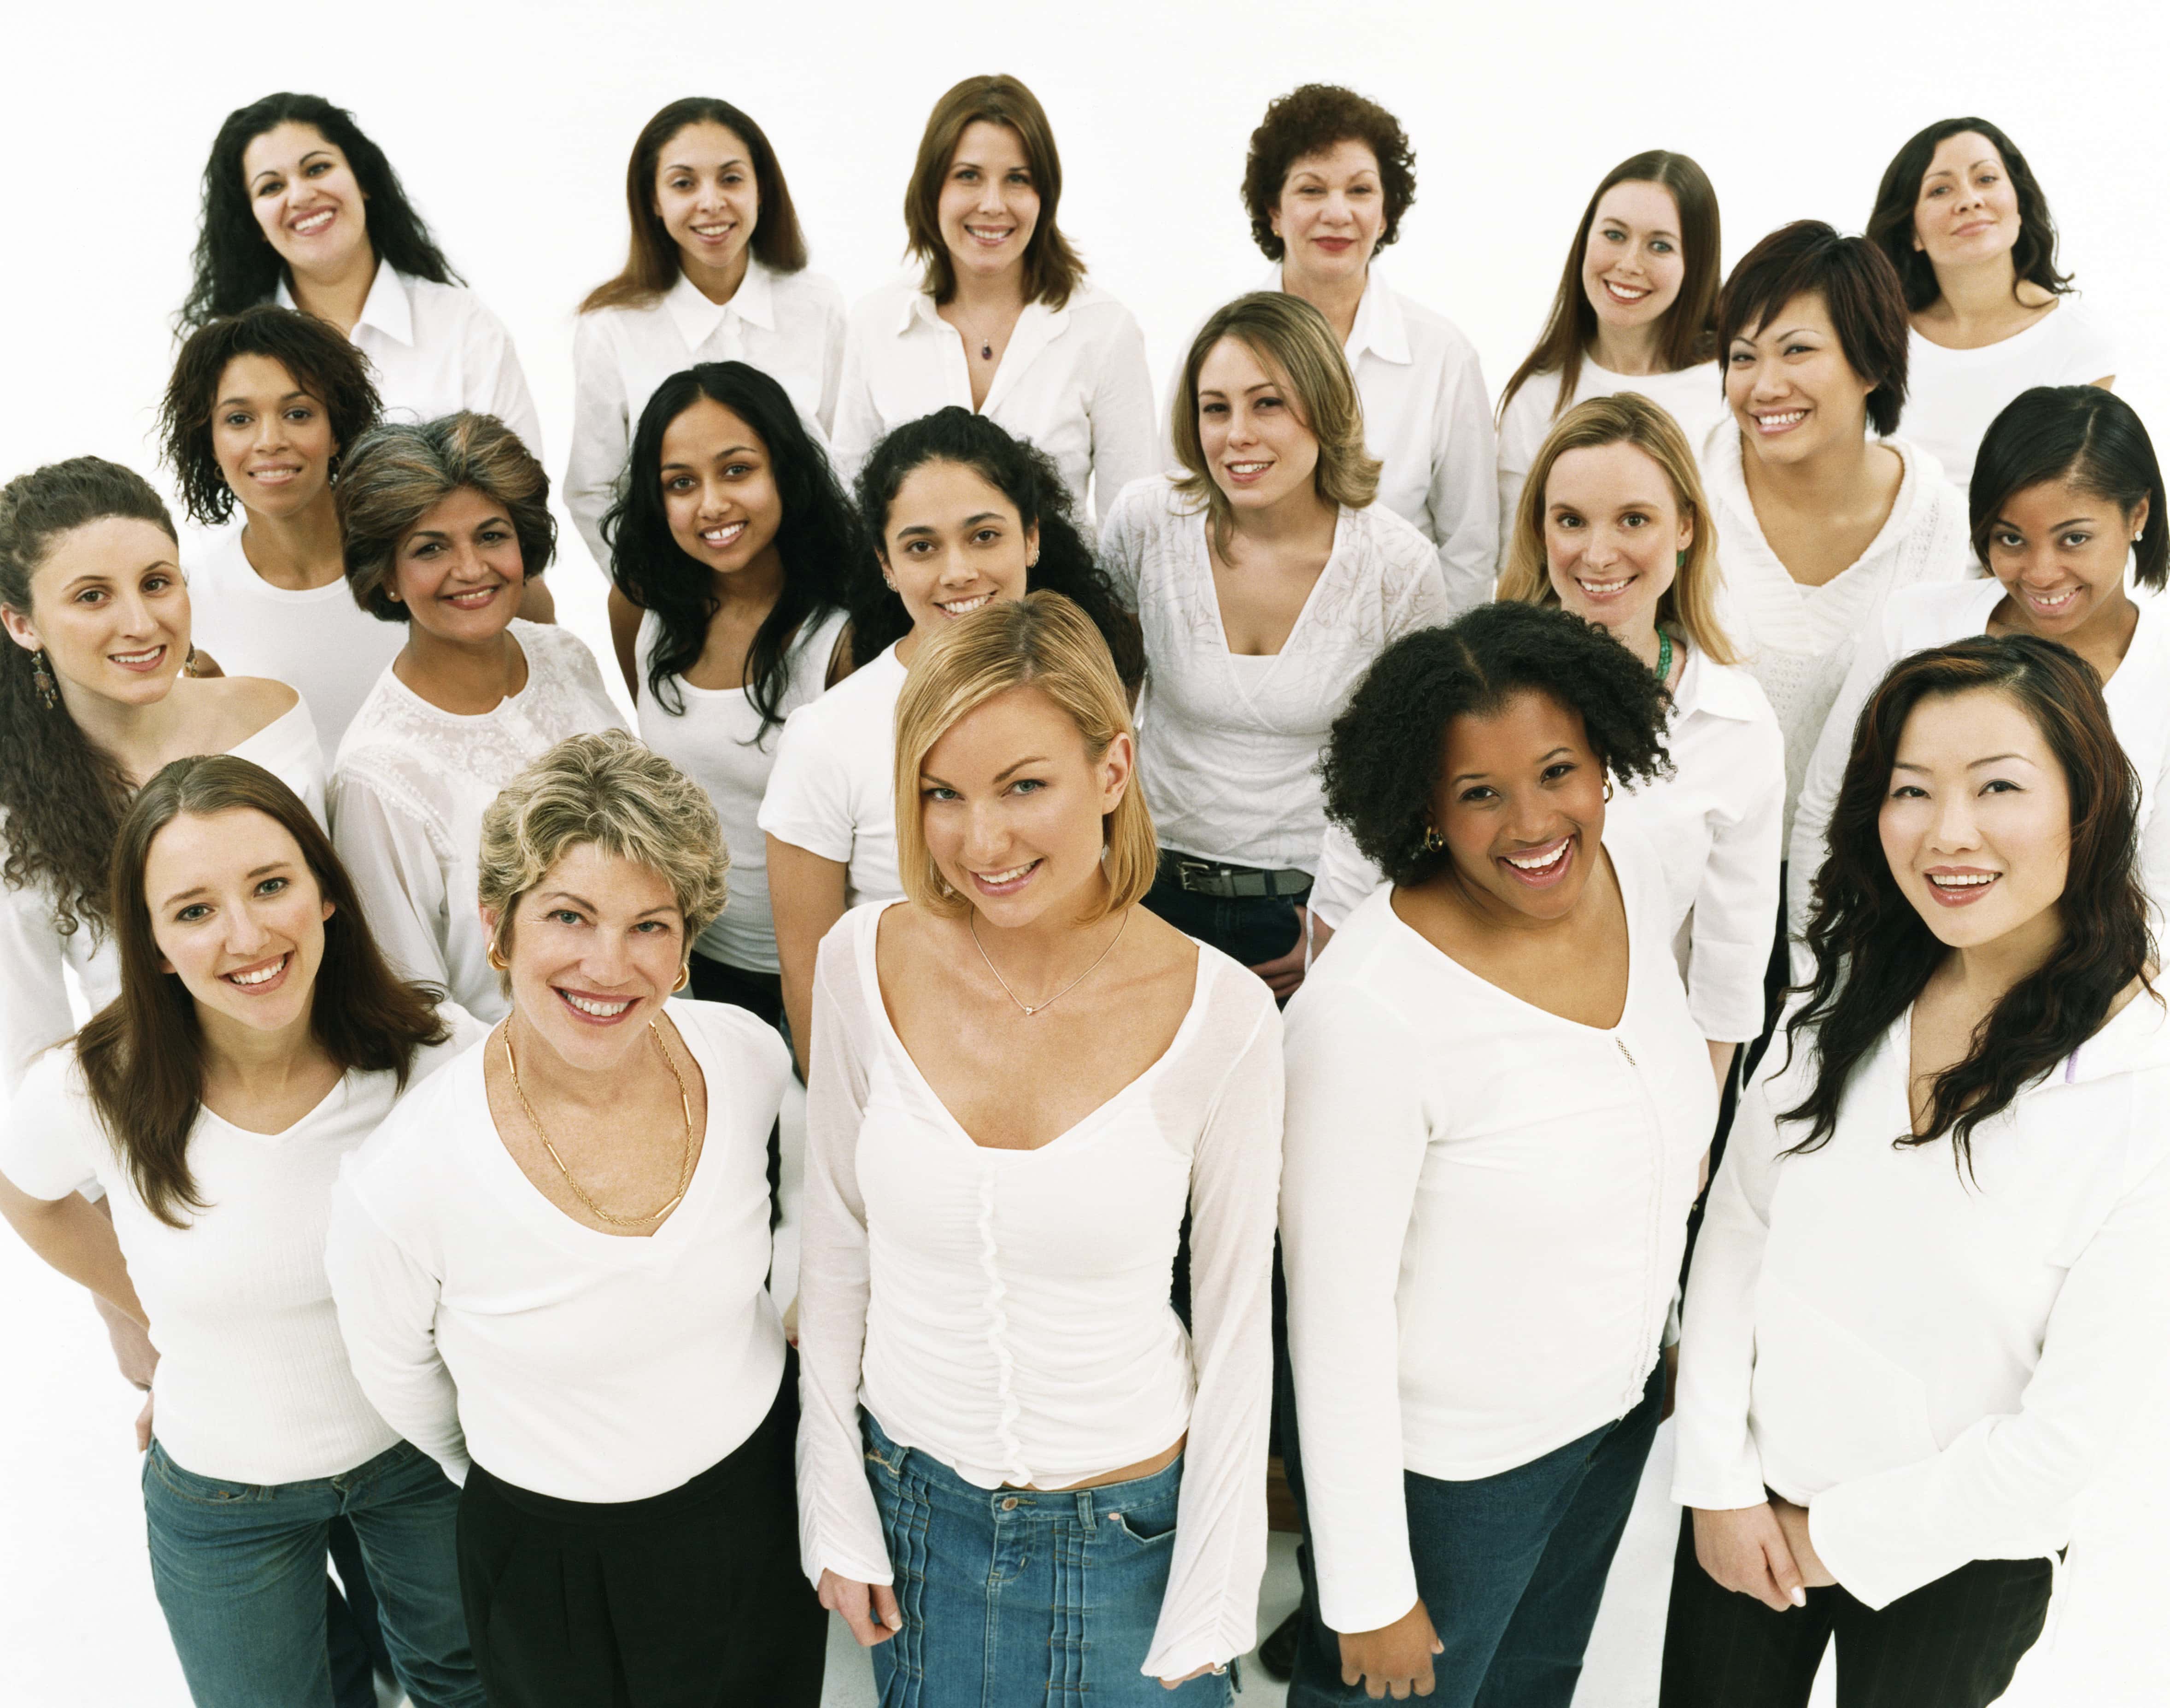 studio-portrait-of-a-mixed-age-multiethnic-large-group-of-happy-women-wearing-white-tops